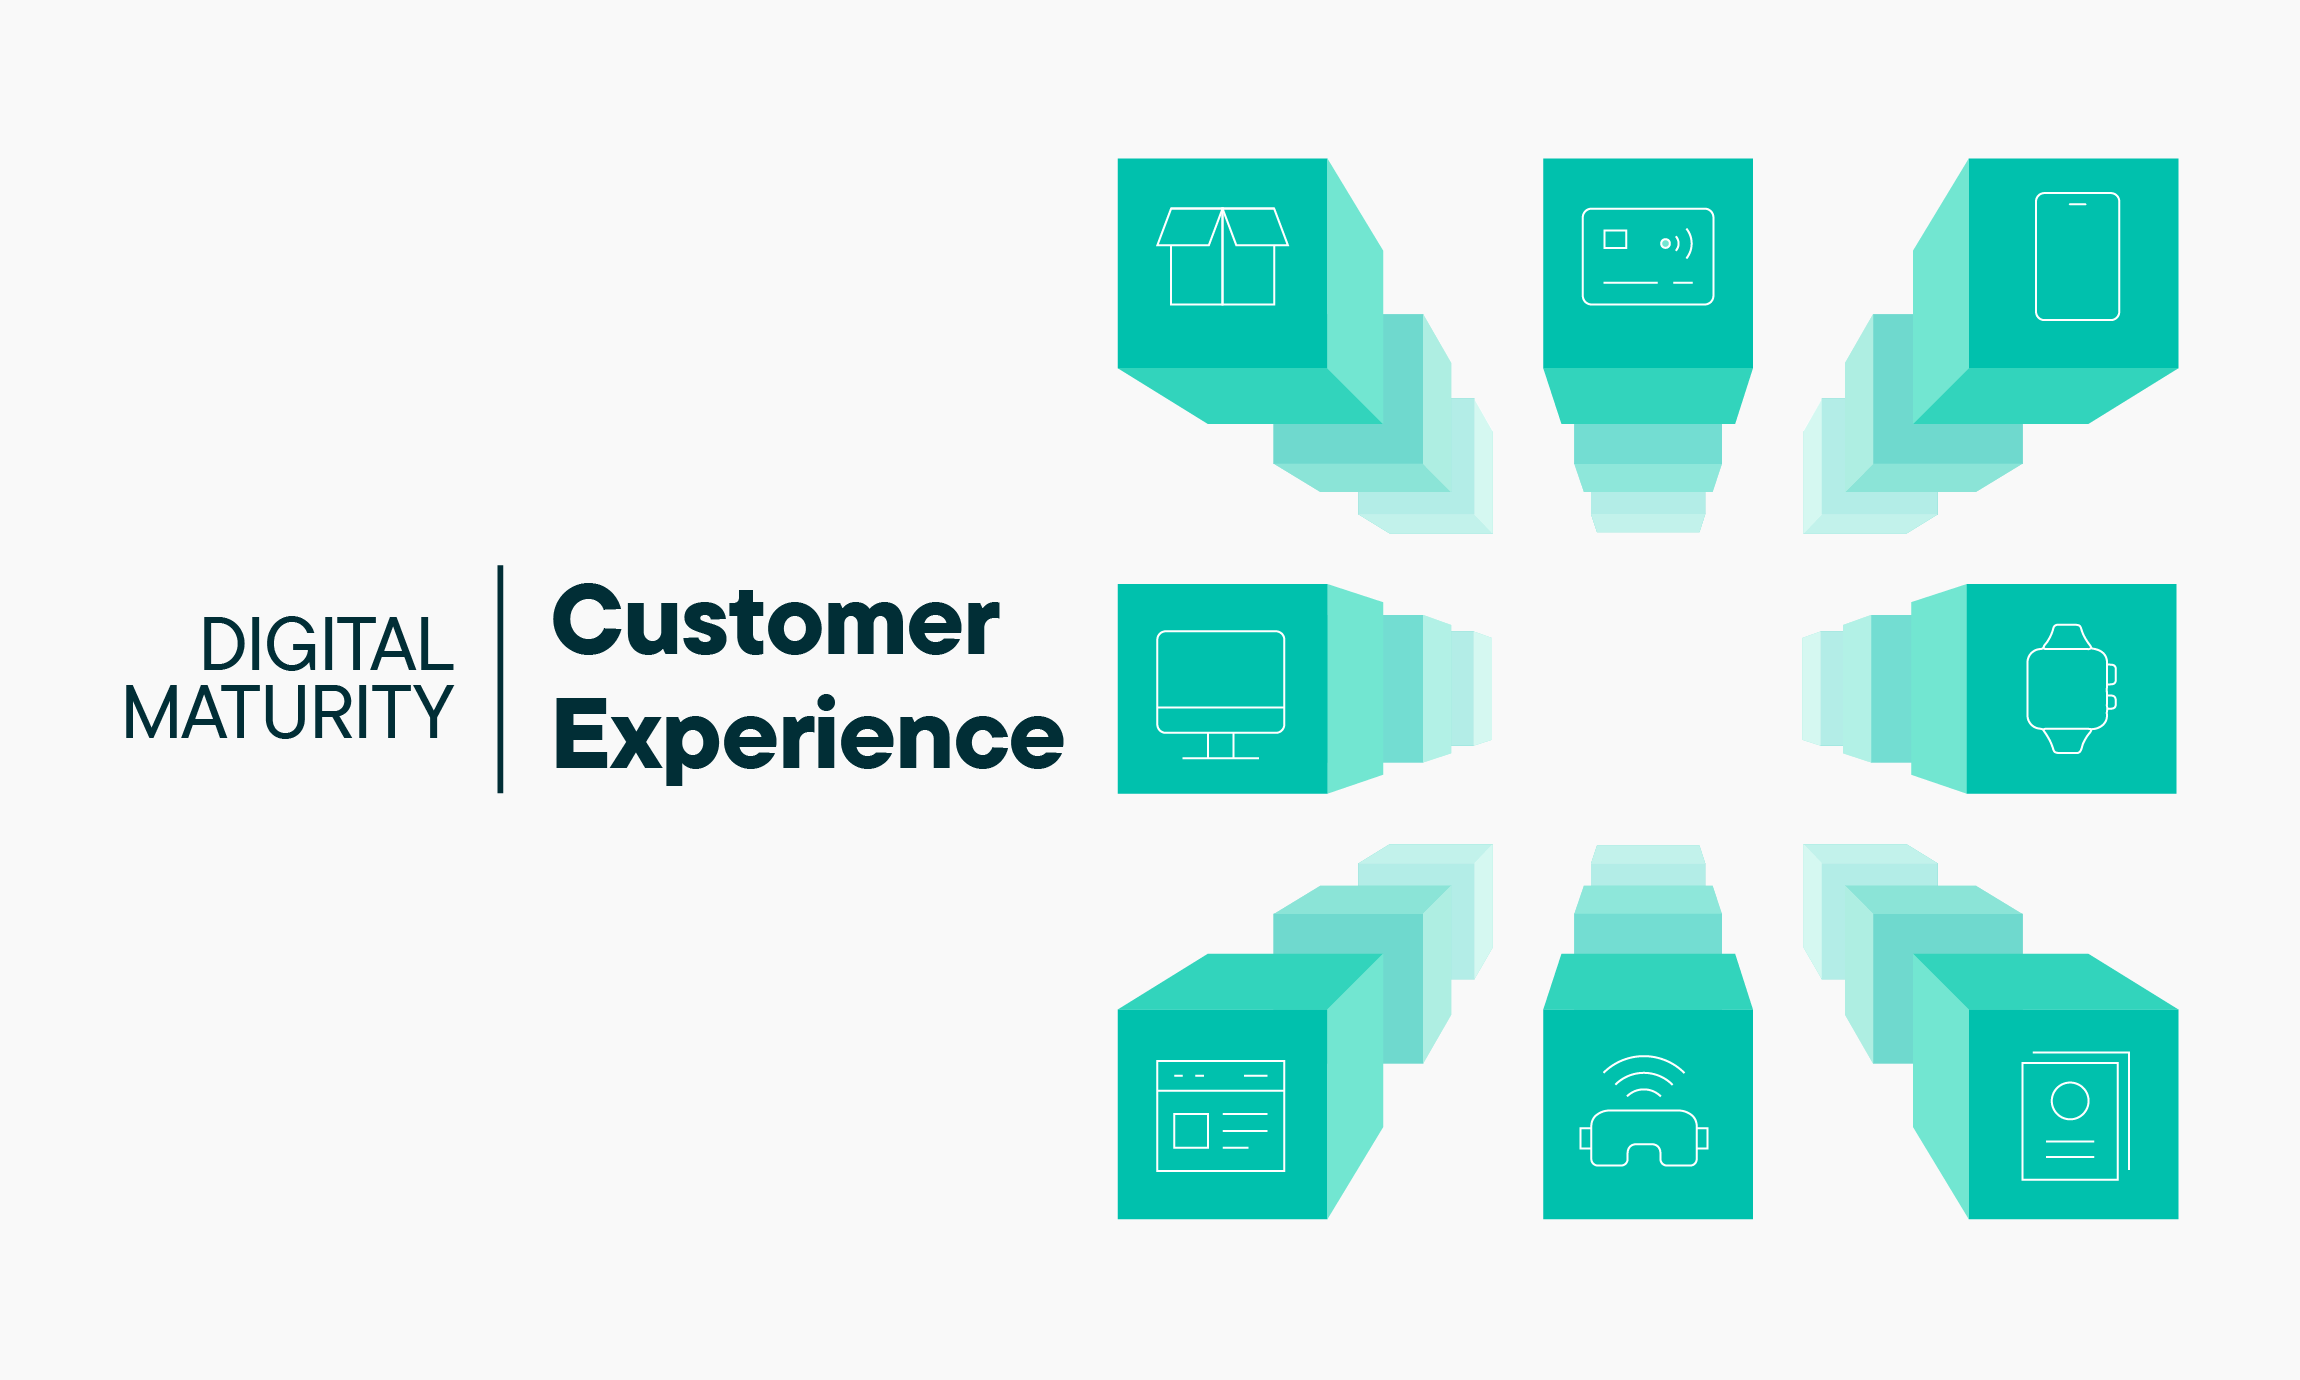 Why Customer Experience is a critical dimension in assessing B2B Digital Maturity